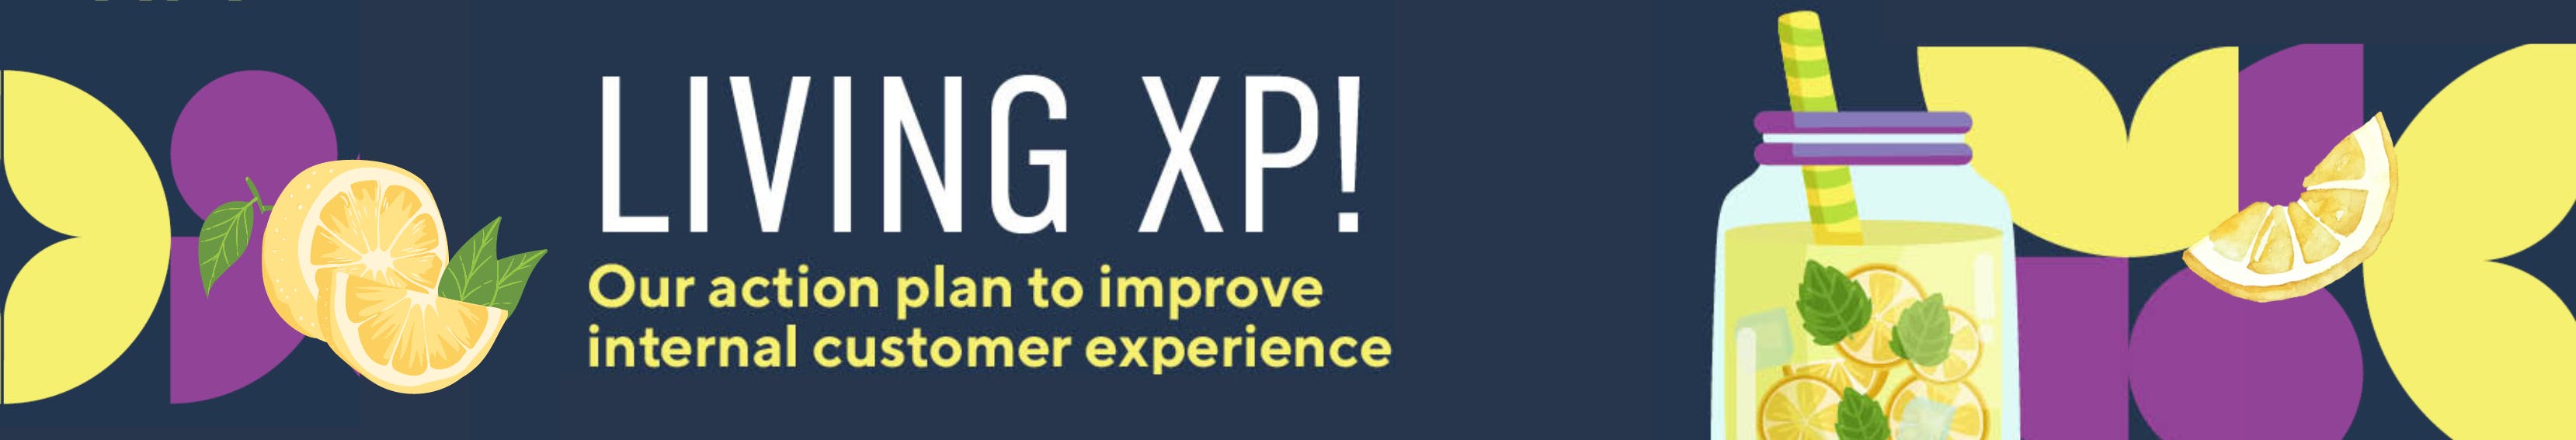 Living XP! Providing an exceptional customer experience for all